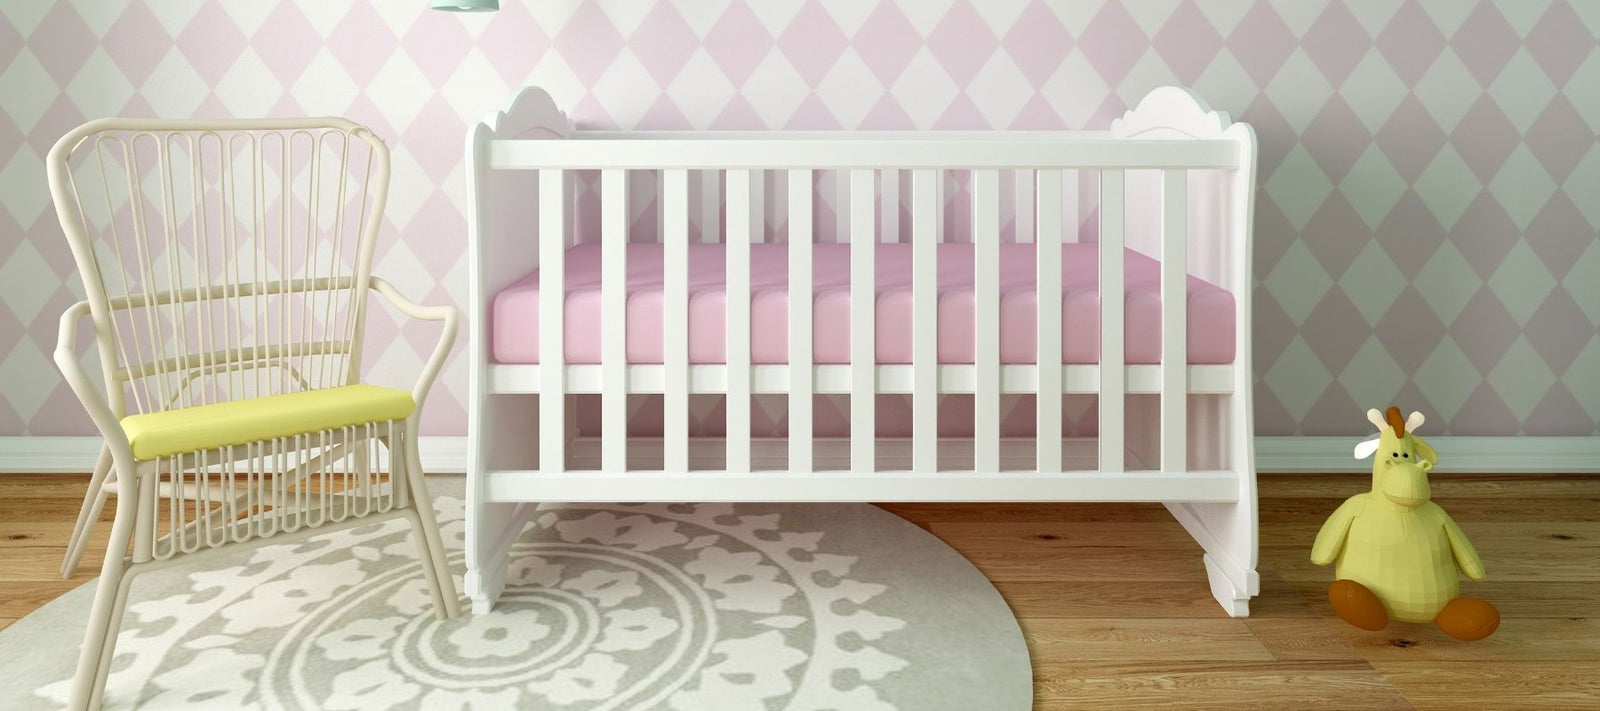 Adorable Nursery Ideas For Your Baby Girl | Bespoke Baby